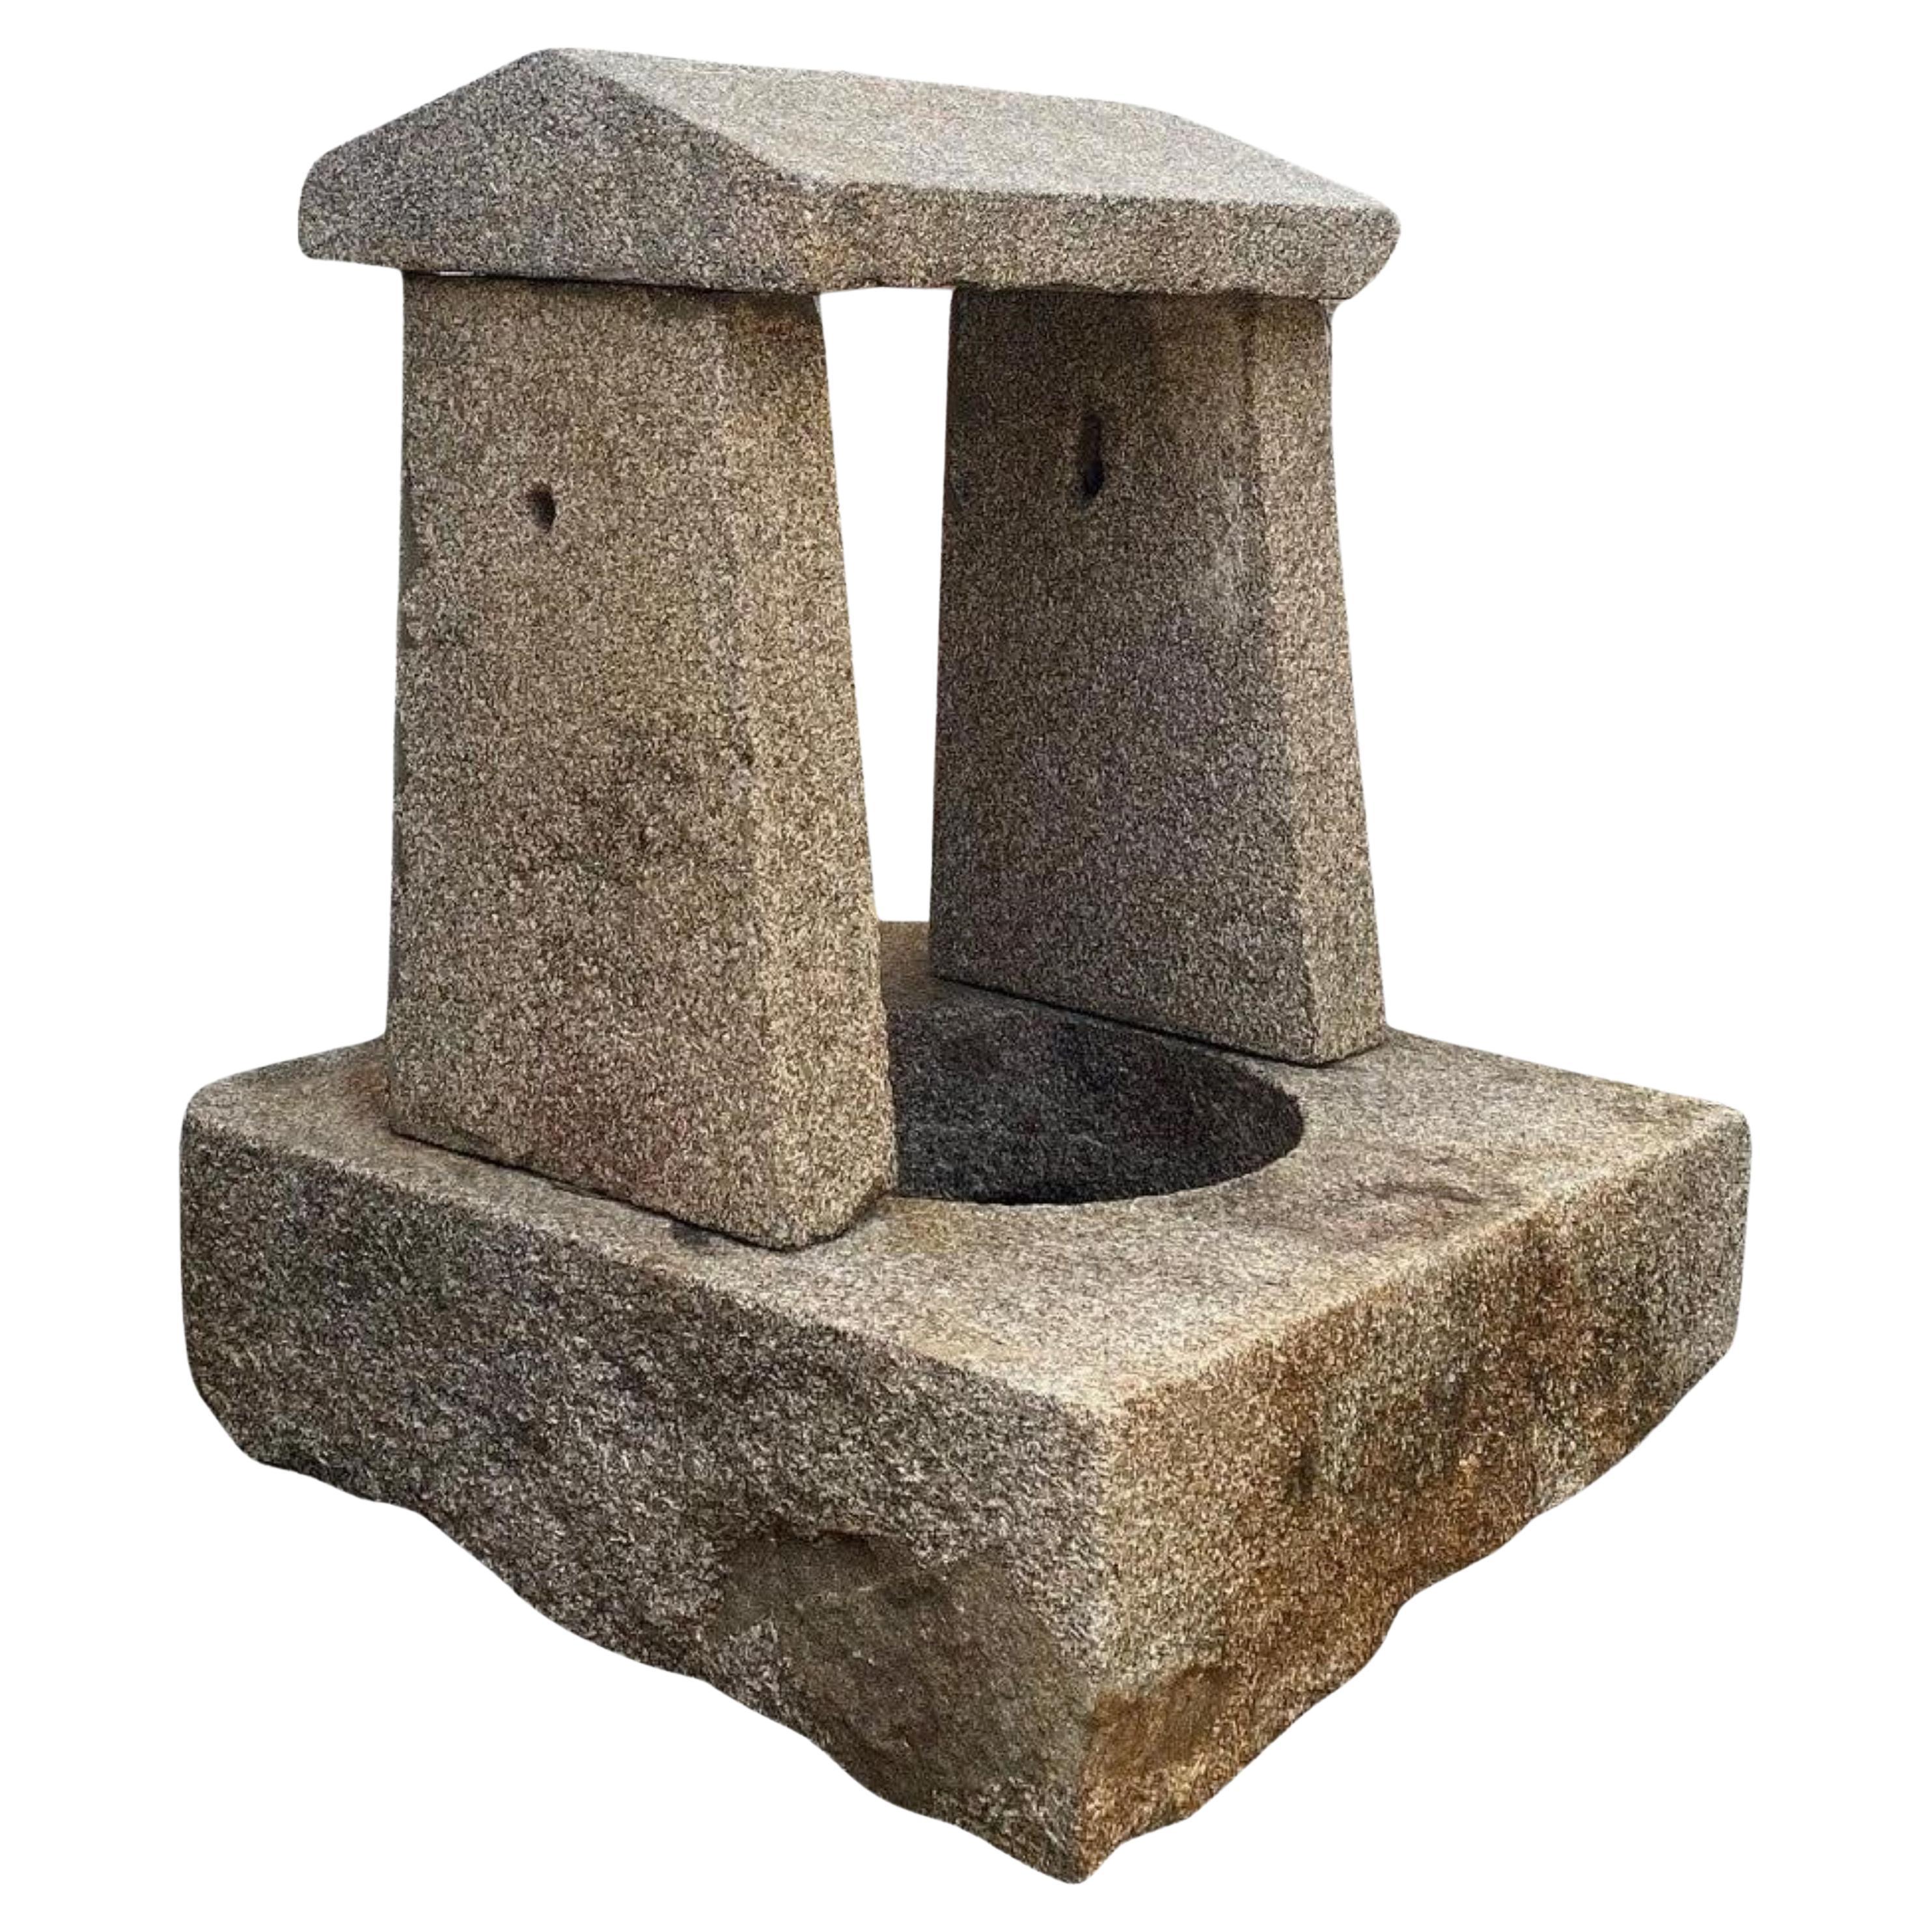 Hand Carved Stone Wellhead Center or Wall Mount Fountain Basin Antique Fire Pit 